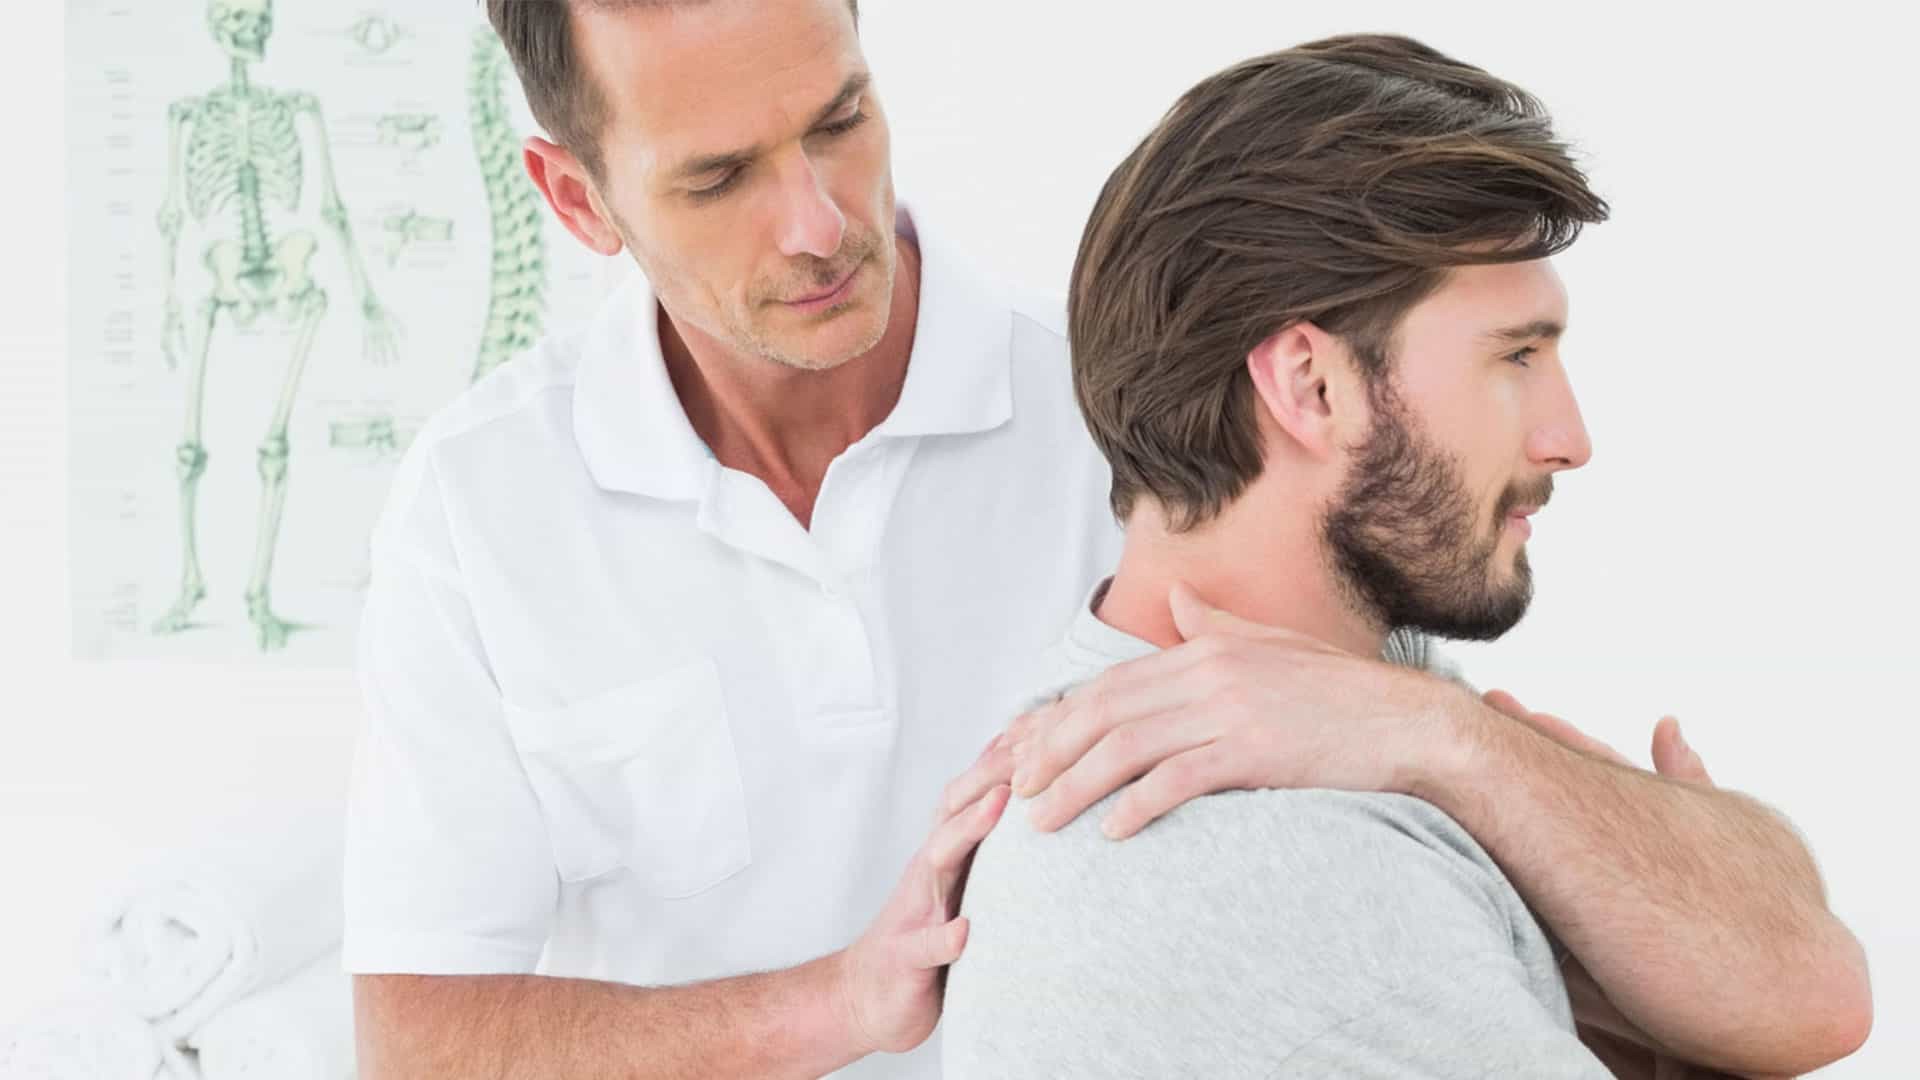 Does Medicare Pay For Chiropractors Services?